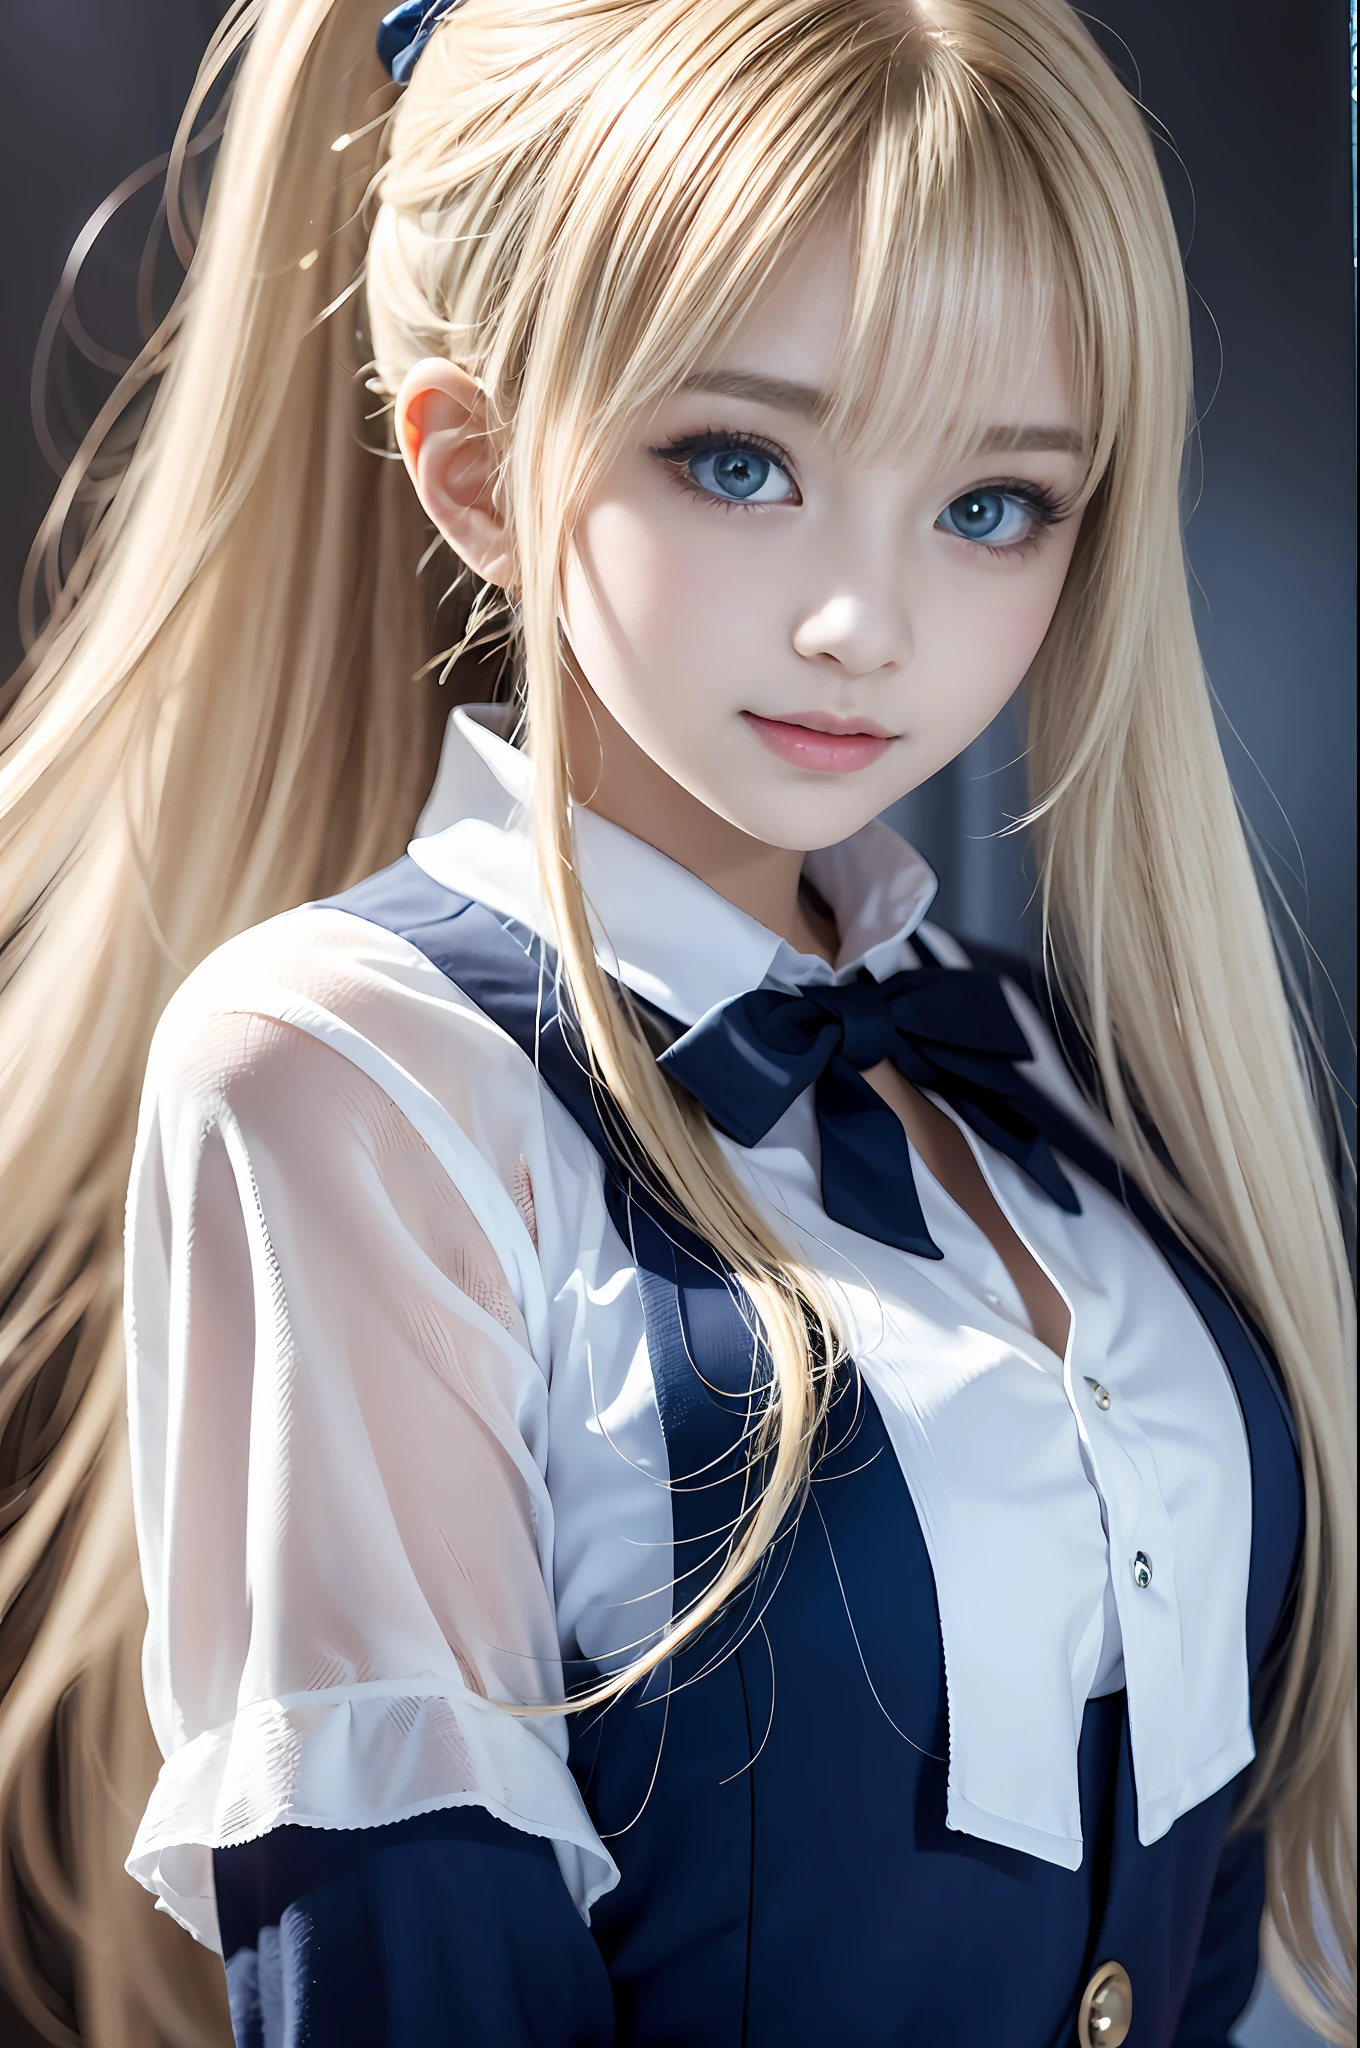 portlate、School Uniforms、bright expression、poneyTail、Young shiny shiny white shiny skin、Best Looks、Blonde reflected light、Platinum blonde hair with dazzling highlights、shiny light hair,、Super long silky straight hair、Beautiful bangs that shine、Glowing crystal clear attractive big blue eyes、Very beautiful nice cute 16 year old girl、Lush bust